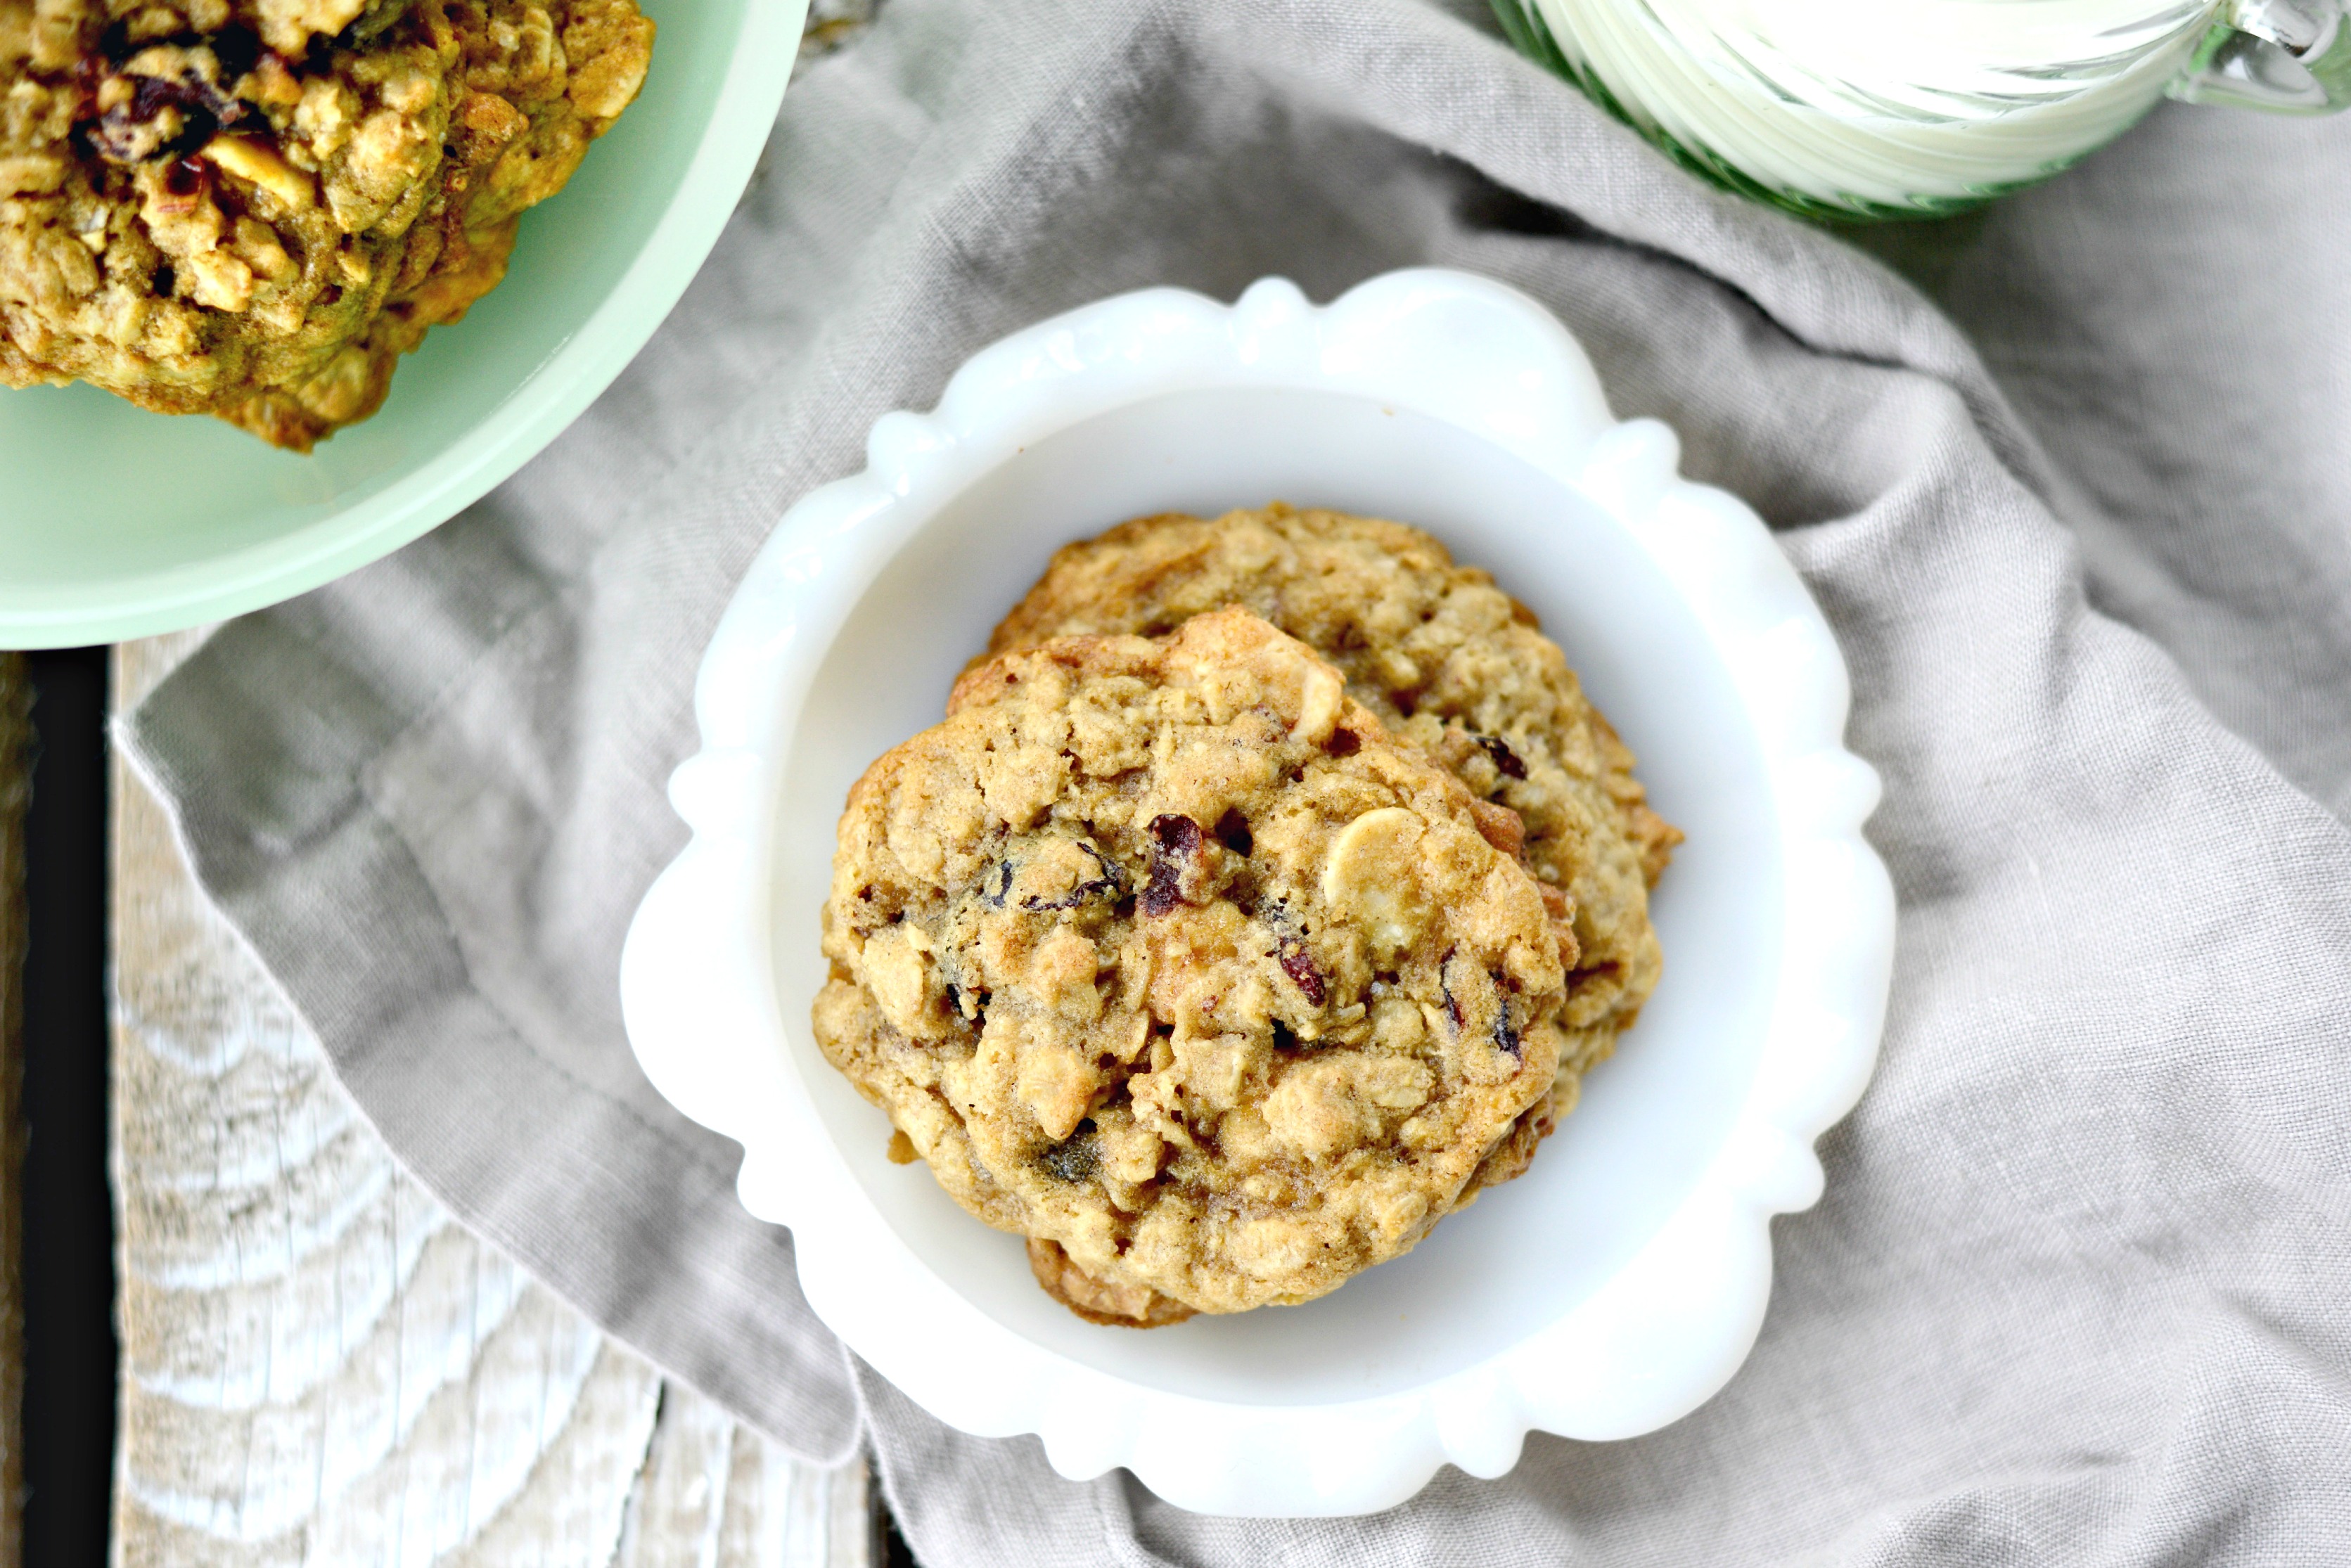 Elisabeth and butter baked oatmeal